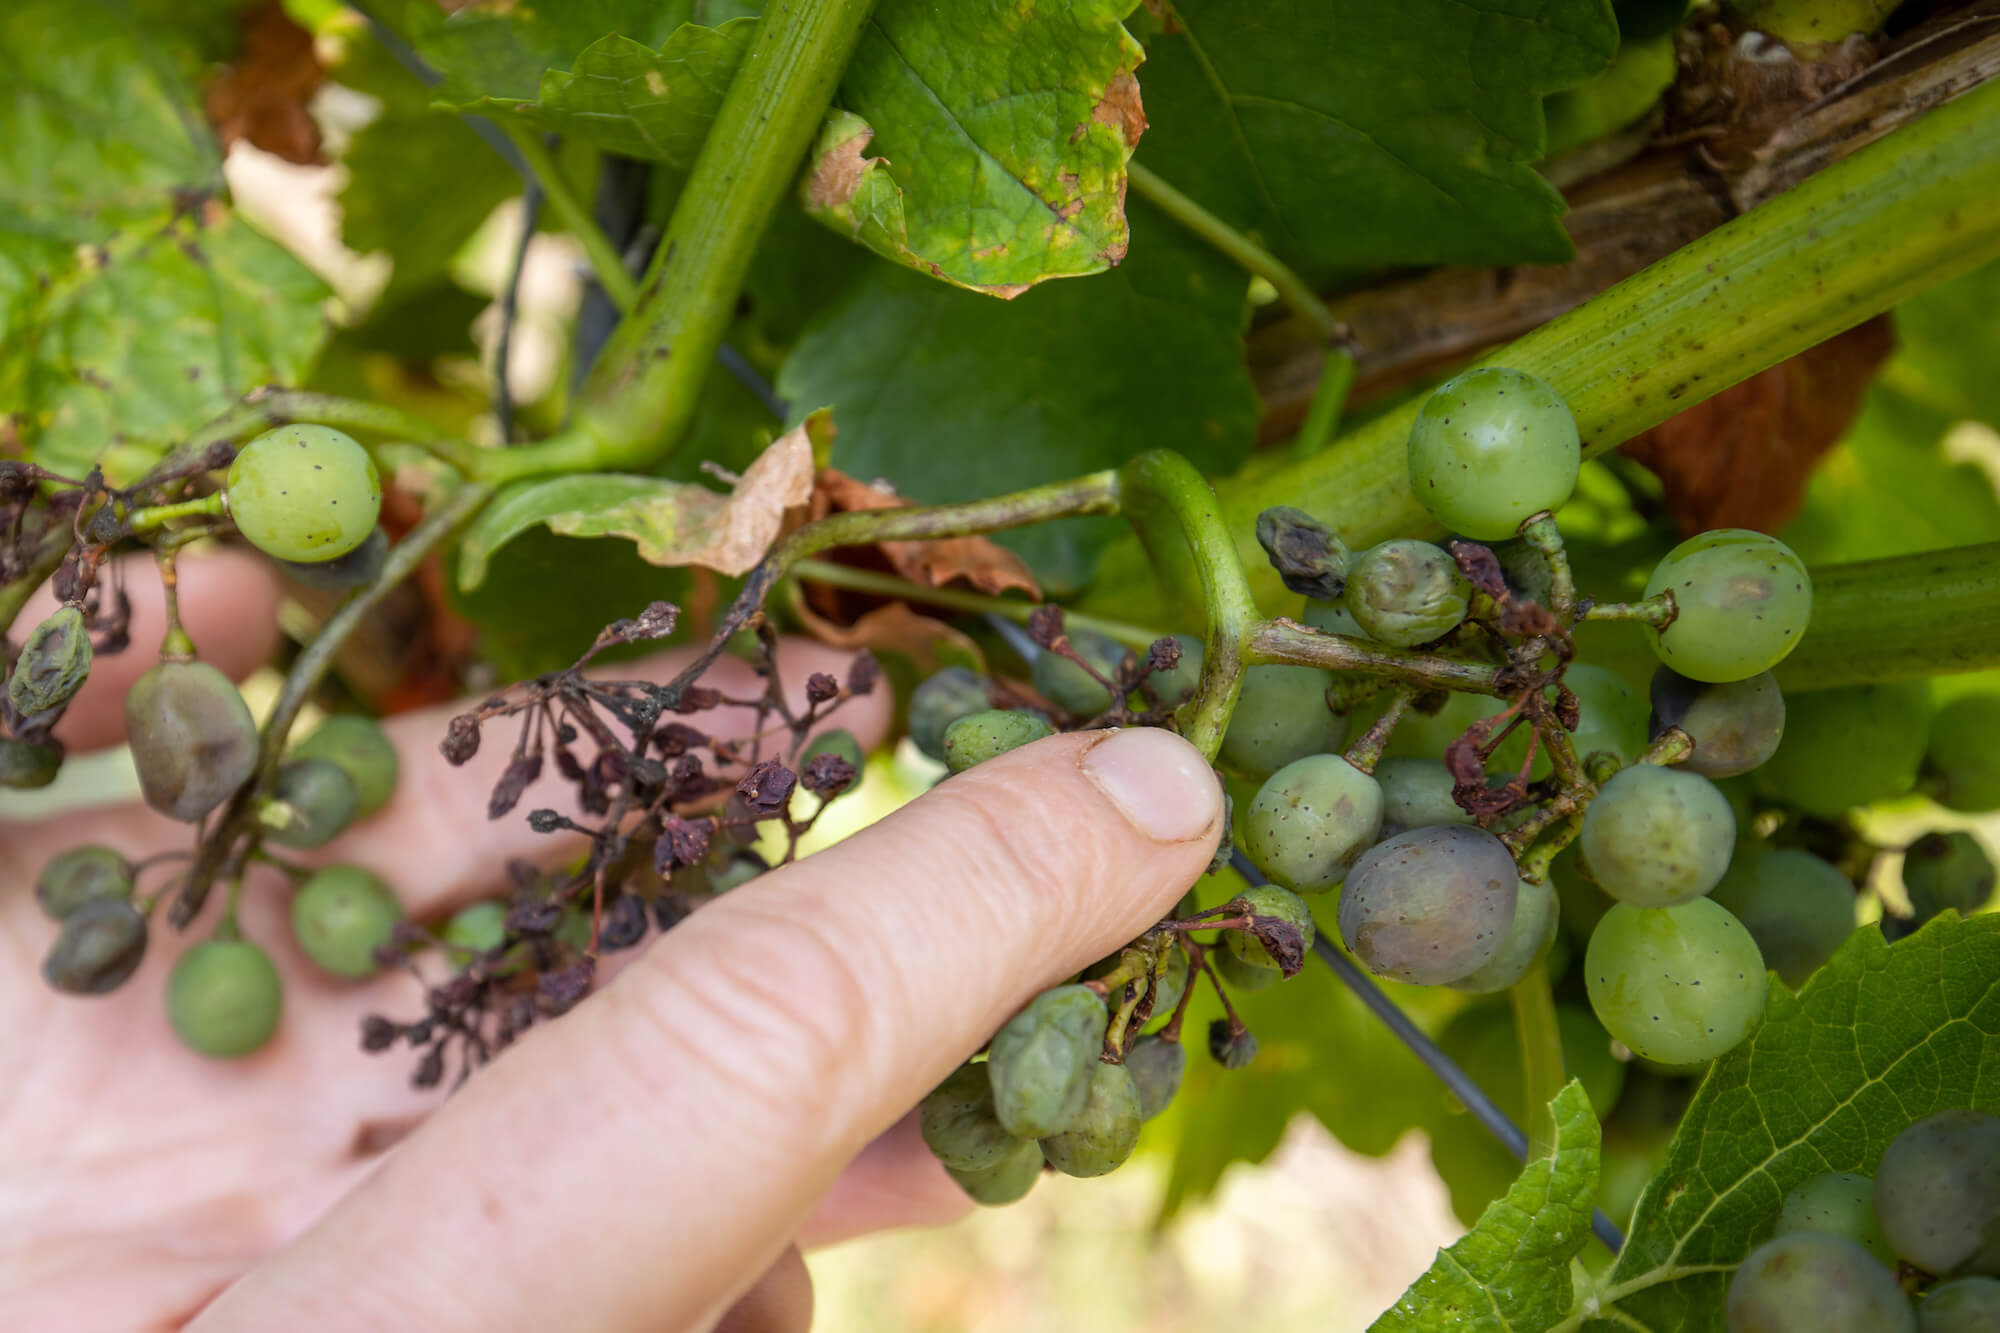 Beate Leopold, managing director of Weinbauring Franken, shows the infestation of fungal spores of the so-called downy mildew (peronospora) on grapes of a vine. August 2021